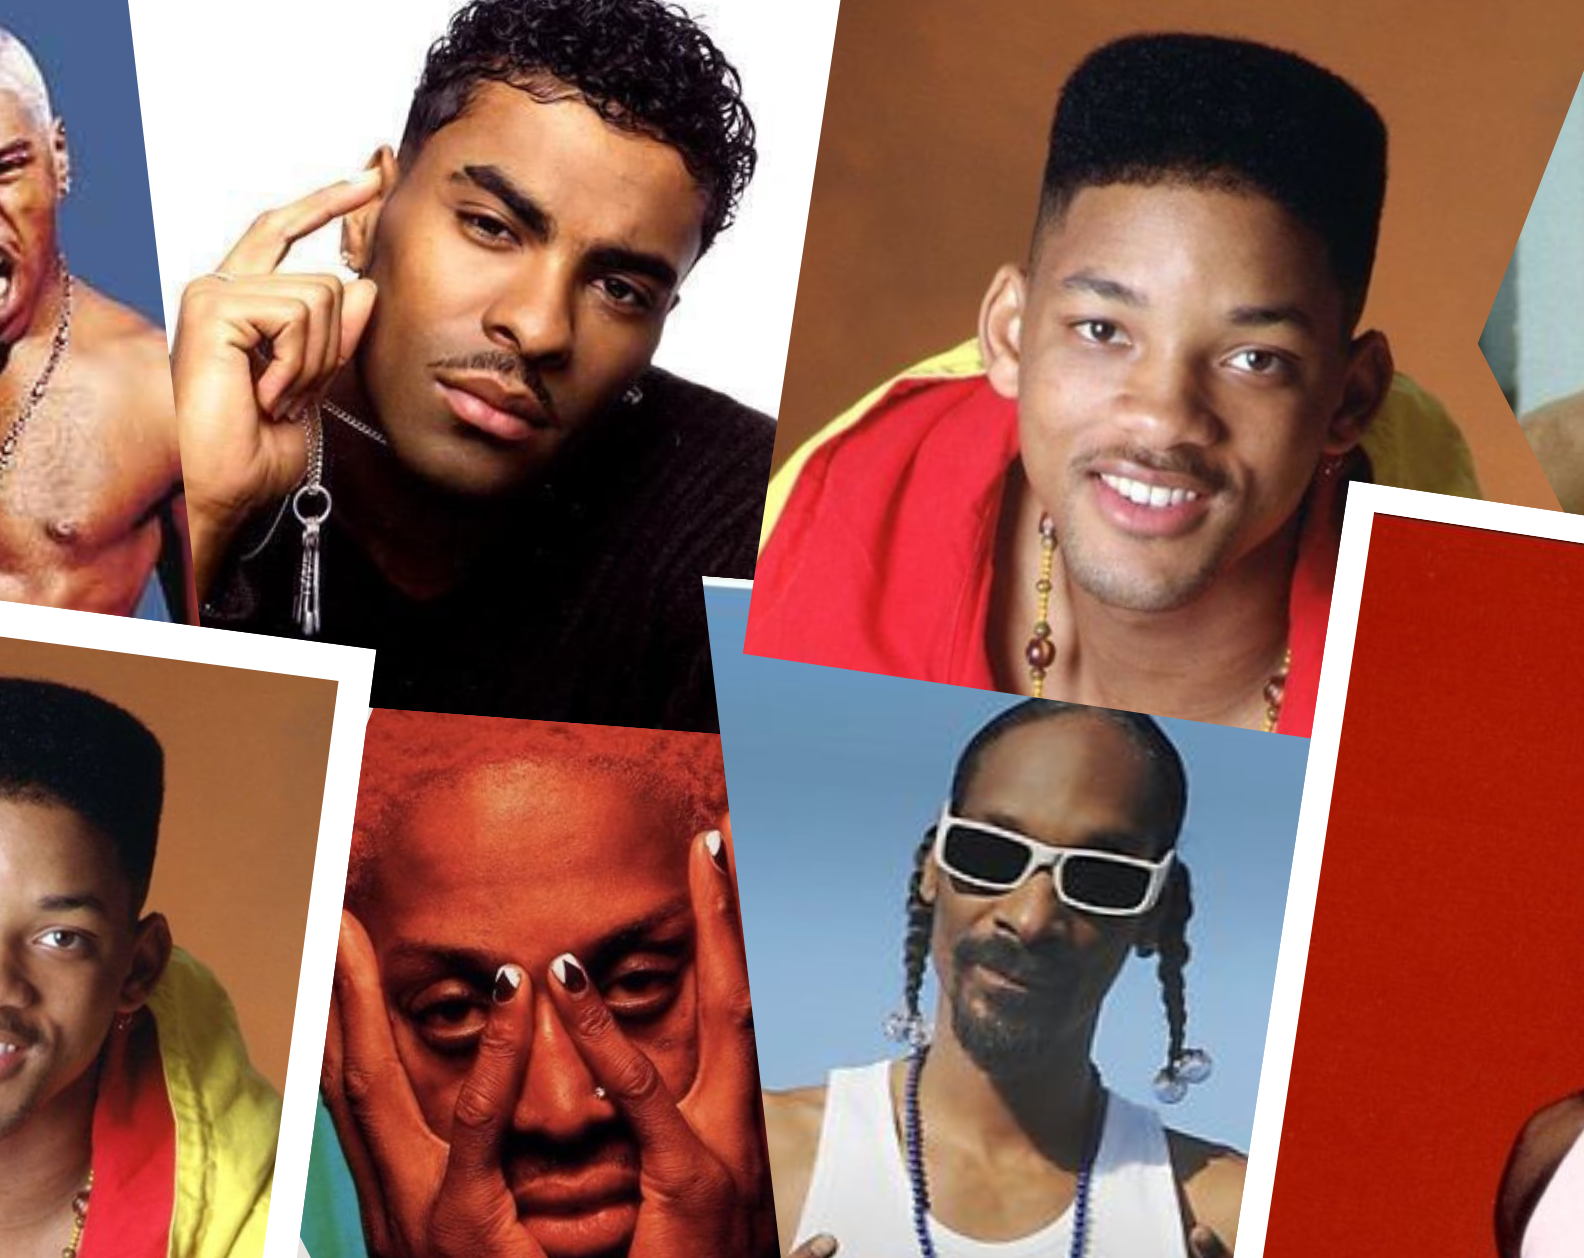 Iconic 90s Hairstyles by the “It Boys” of the Decade